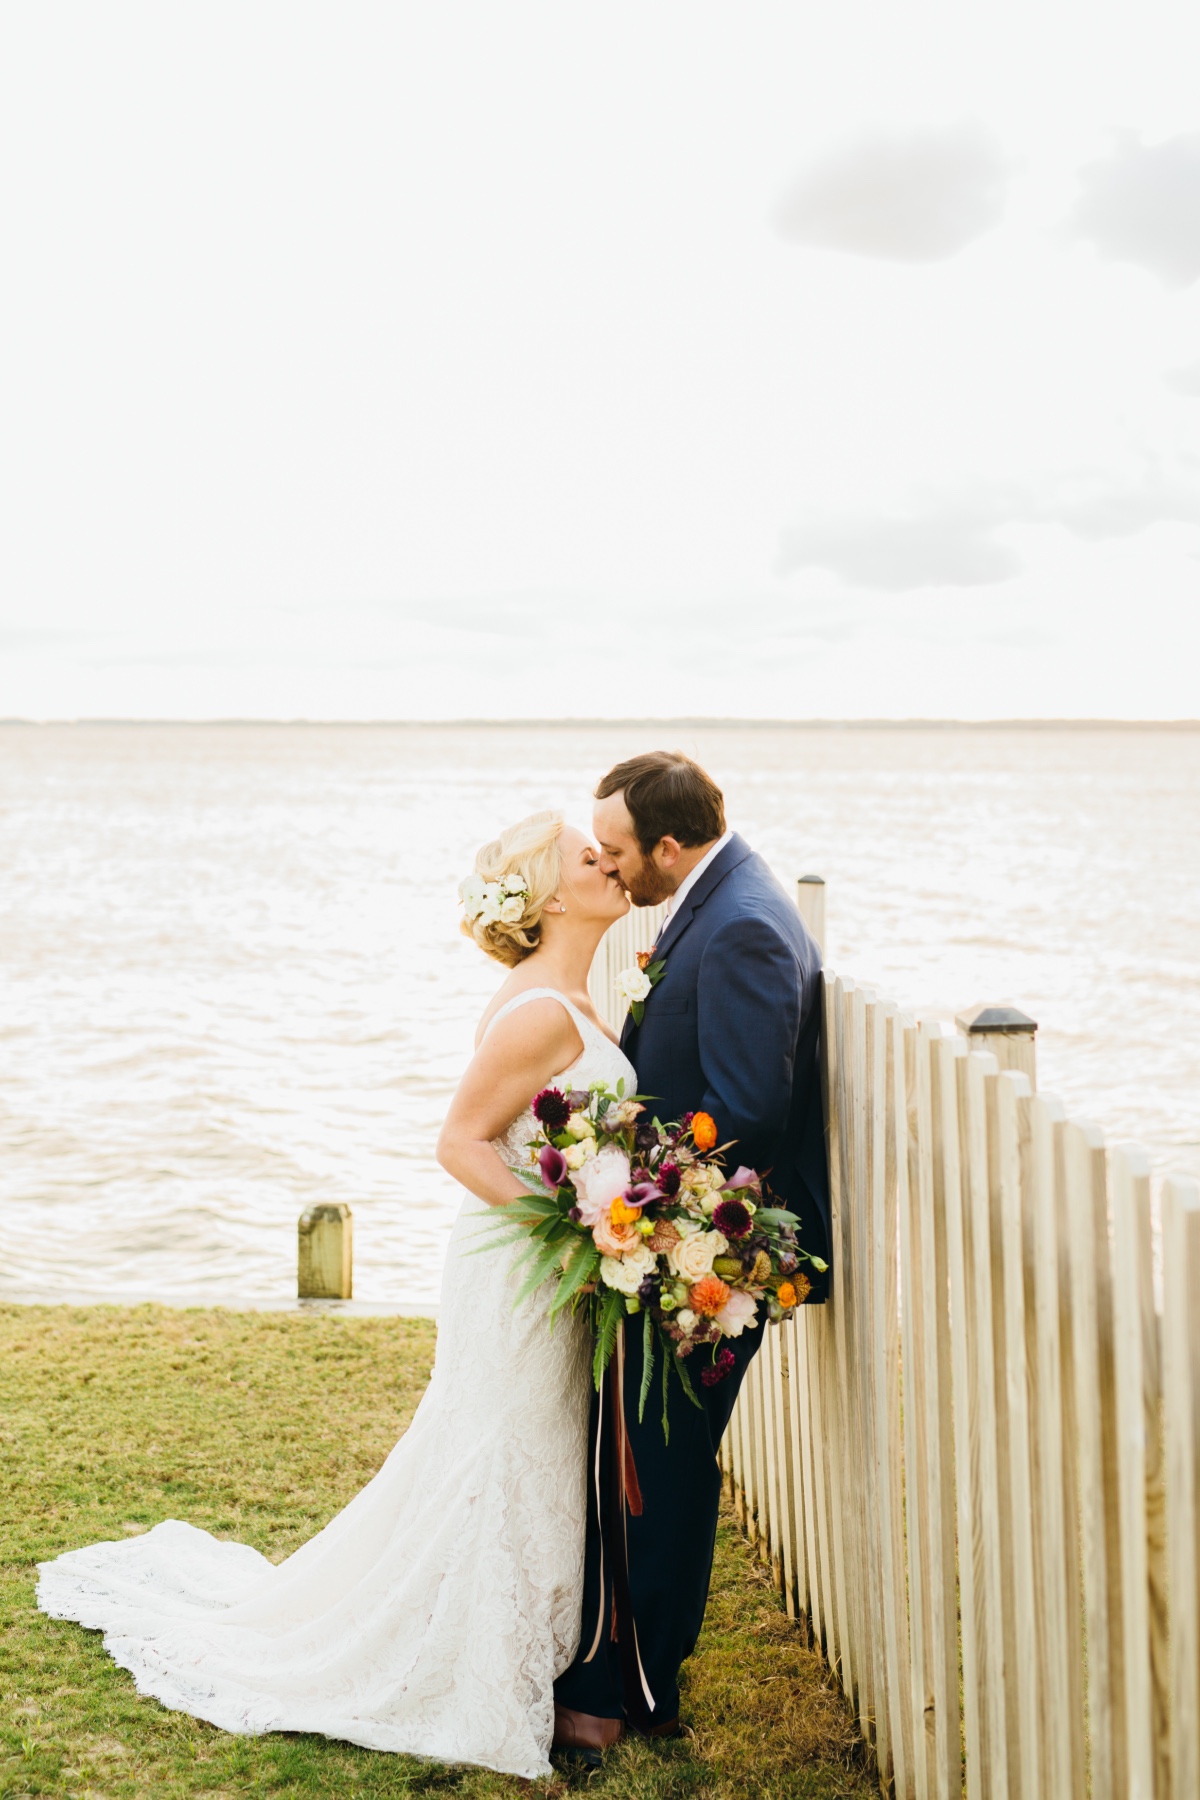 Sophisticated water front wedding